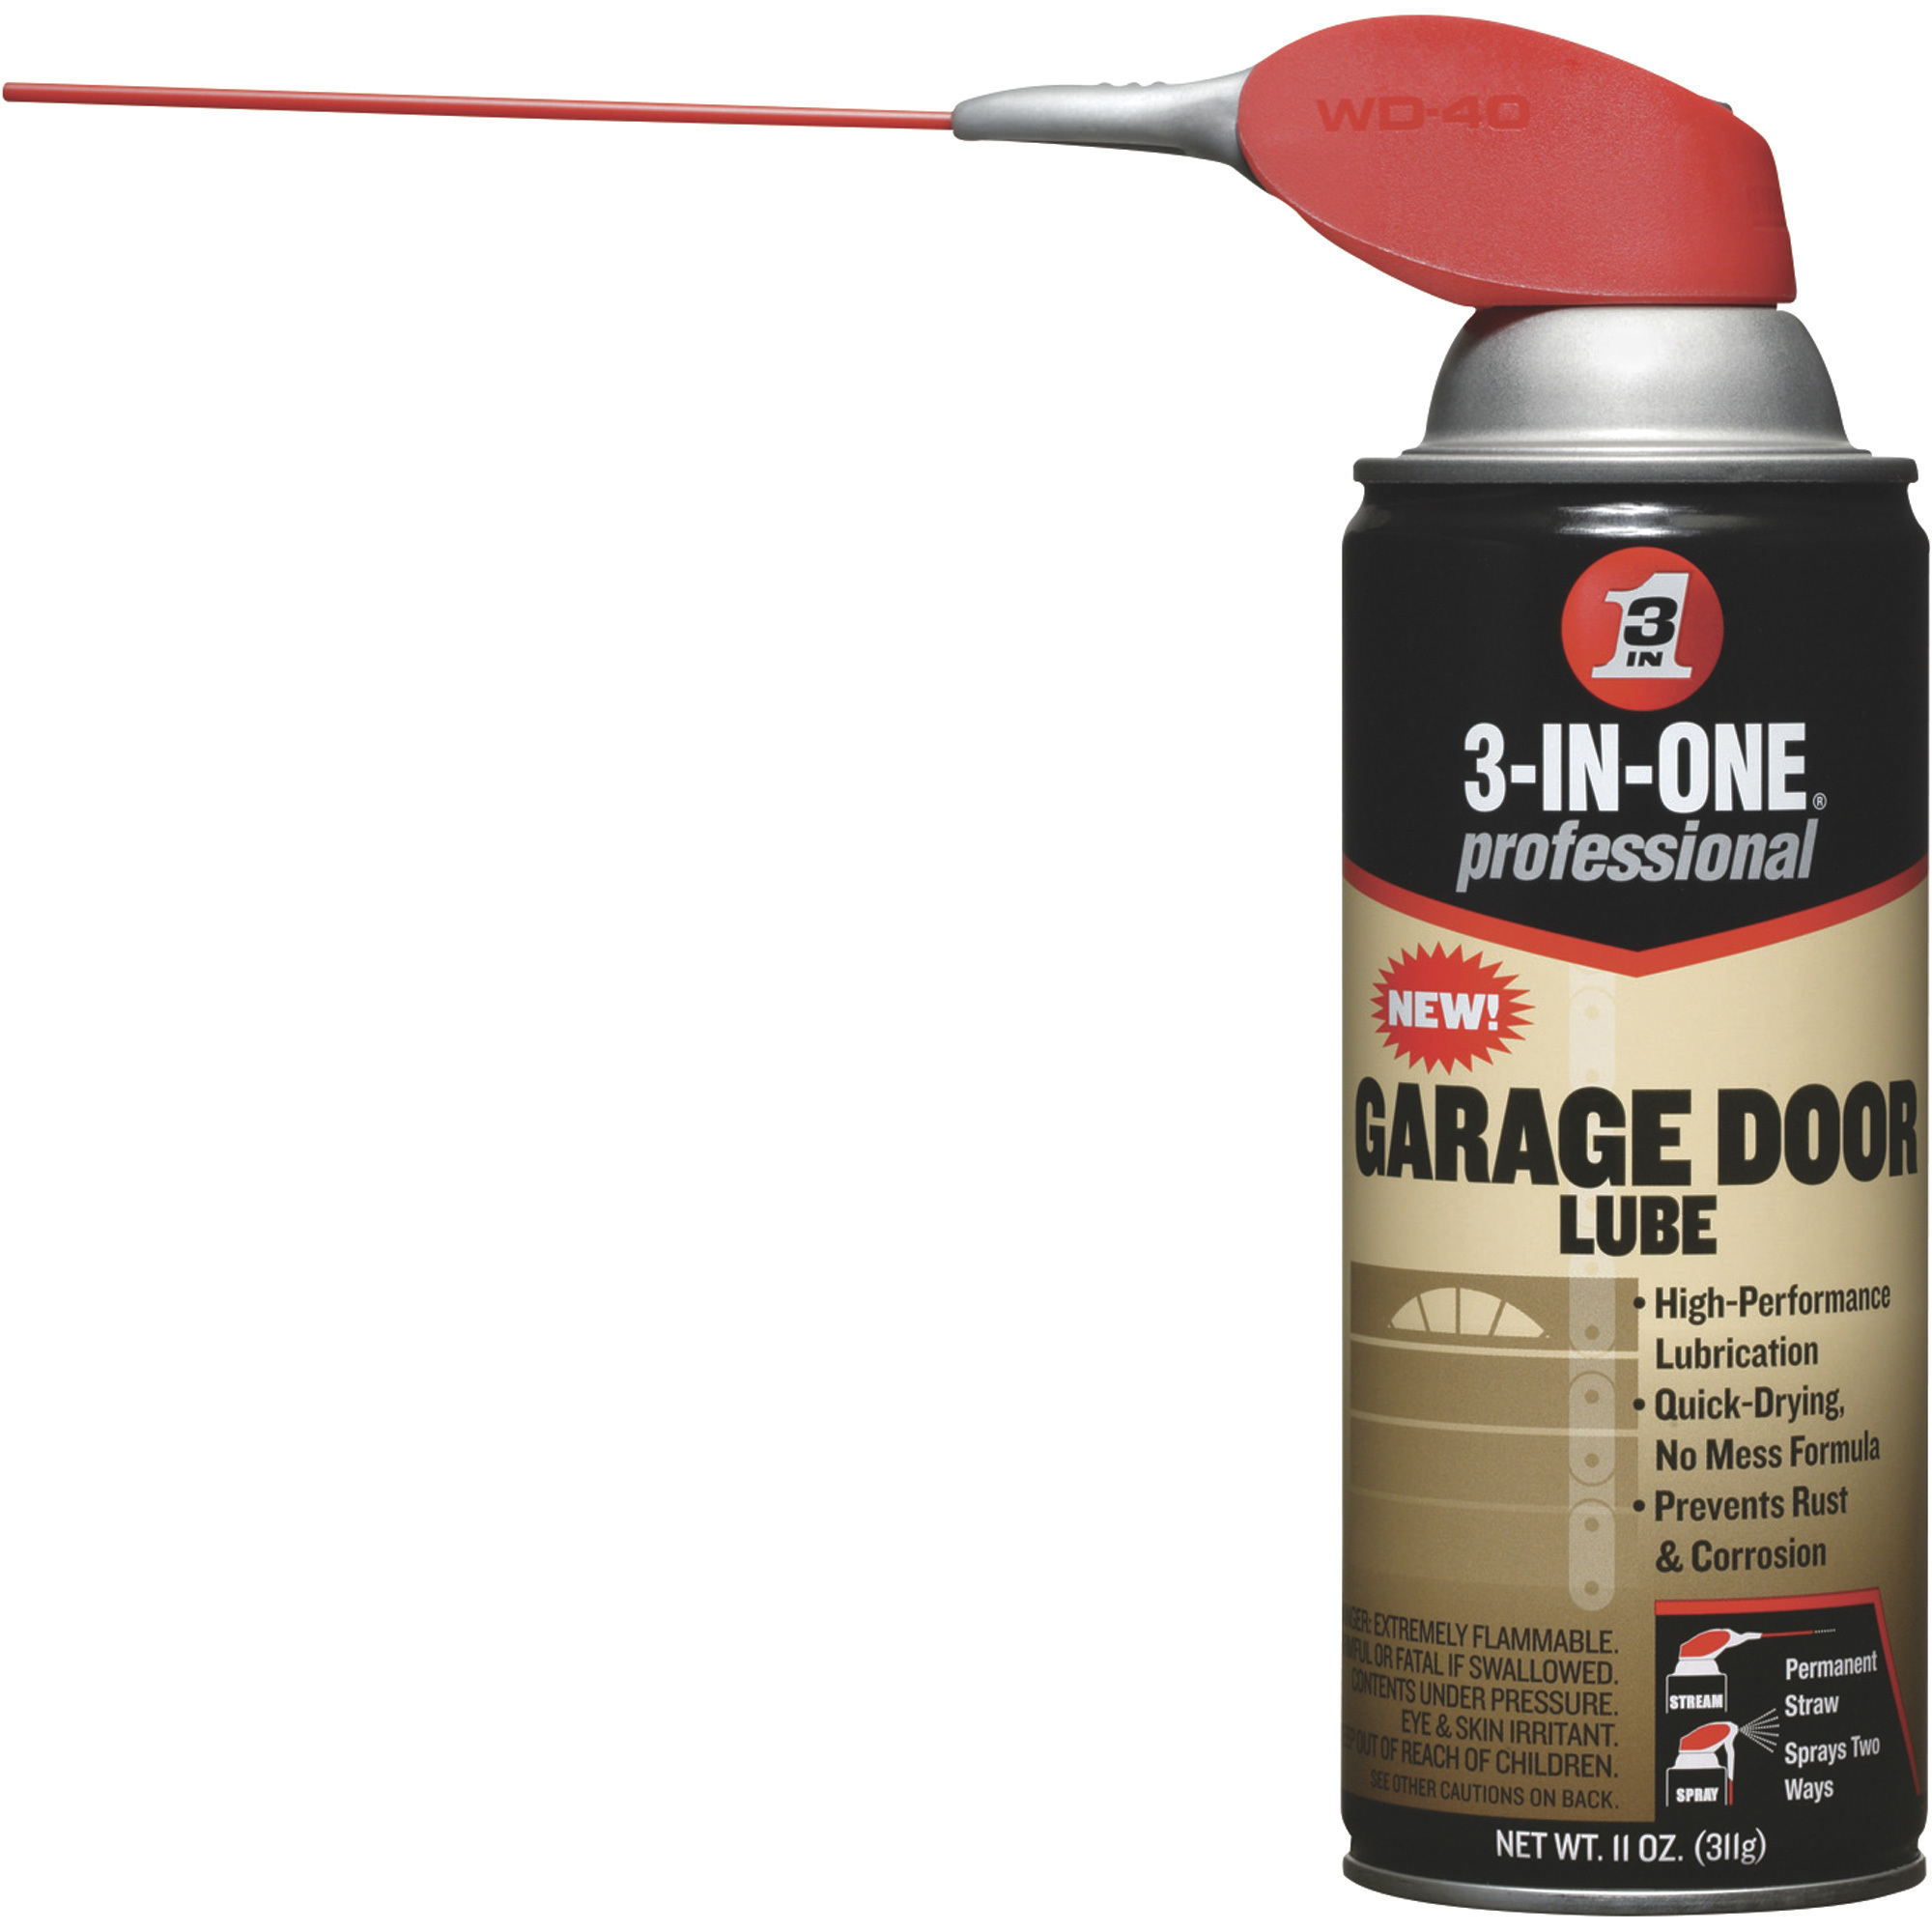 3 in One Garage Door Lube - Before and After 